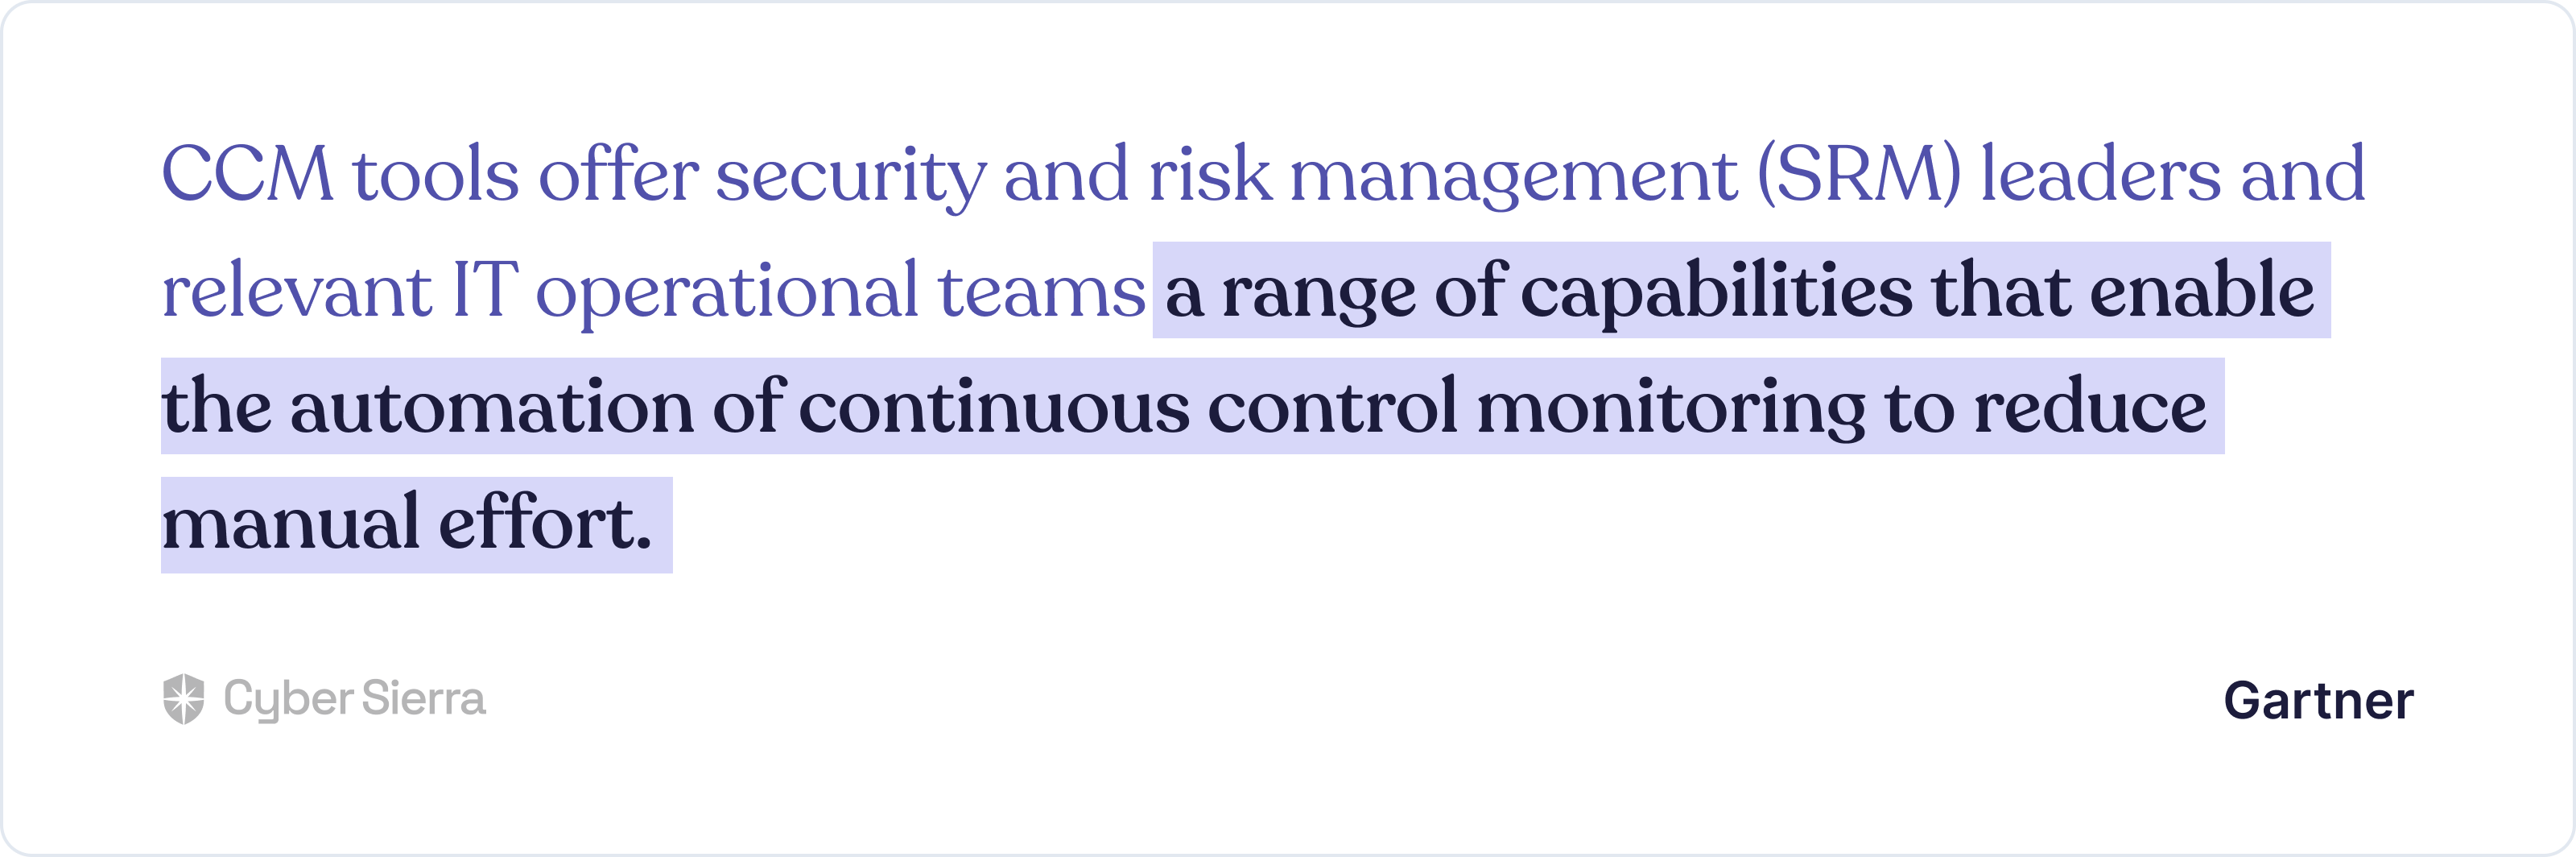 As you can imagine, that’ll take a lot of processes, procedures, and DevSecOps professionals to pull this off, if done manually. But with a CCM tool, security executives can automate their way to the benefits of CCM more efficiently. 